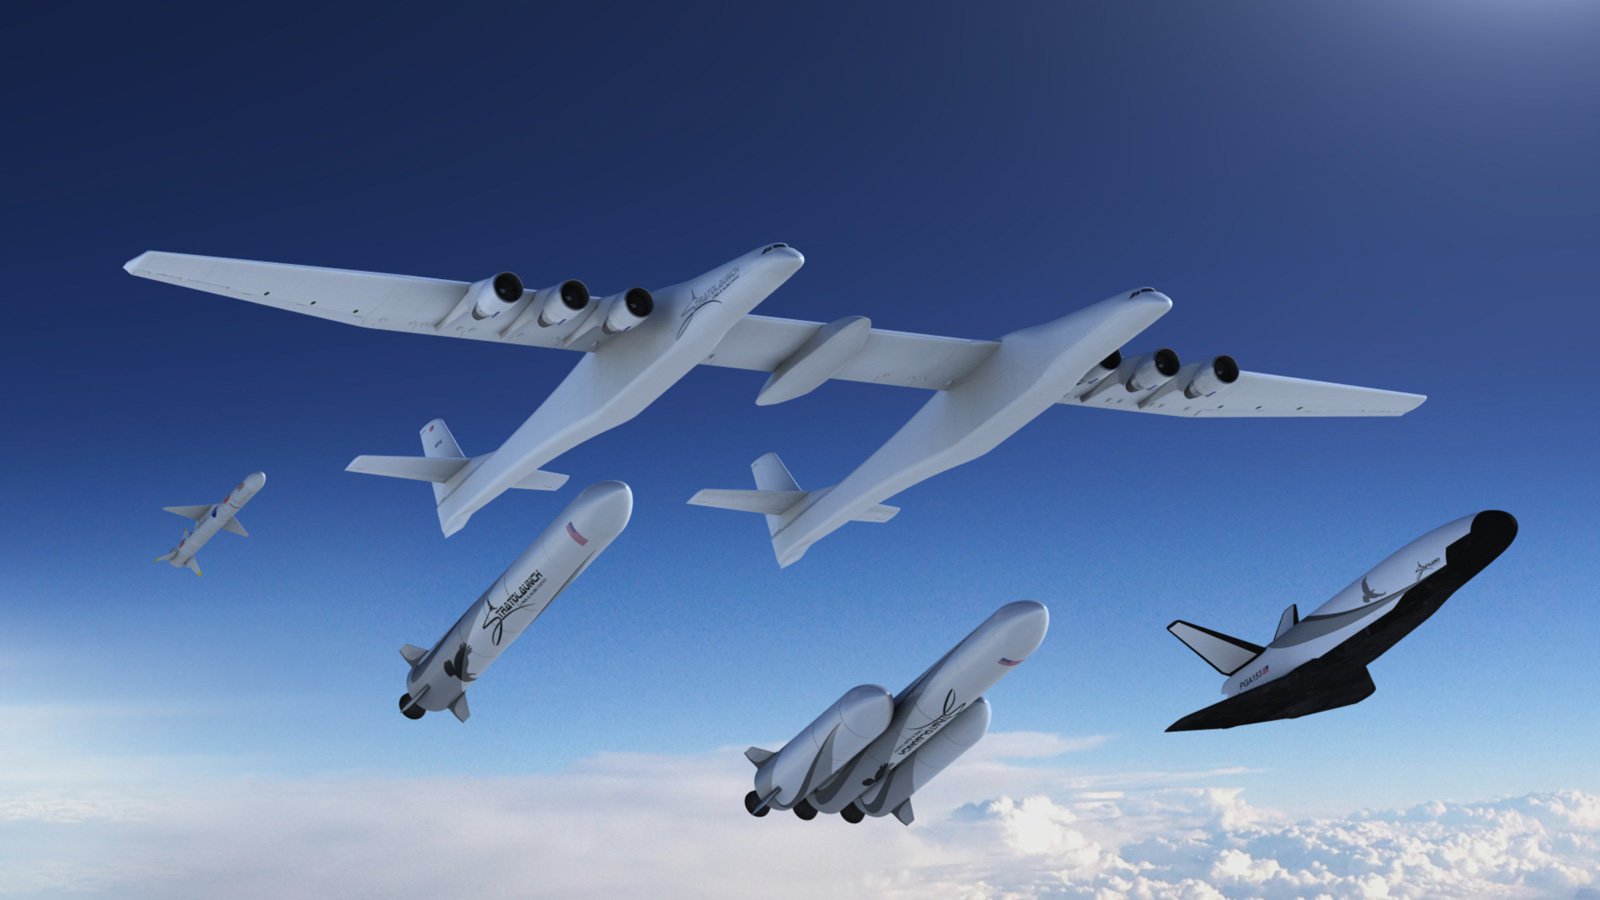 Private aerospace company Stratolaunch Systems abandoned most of their projects